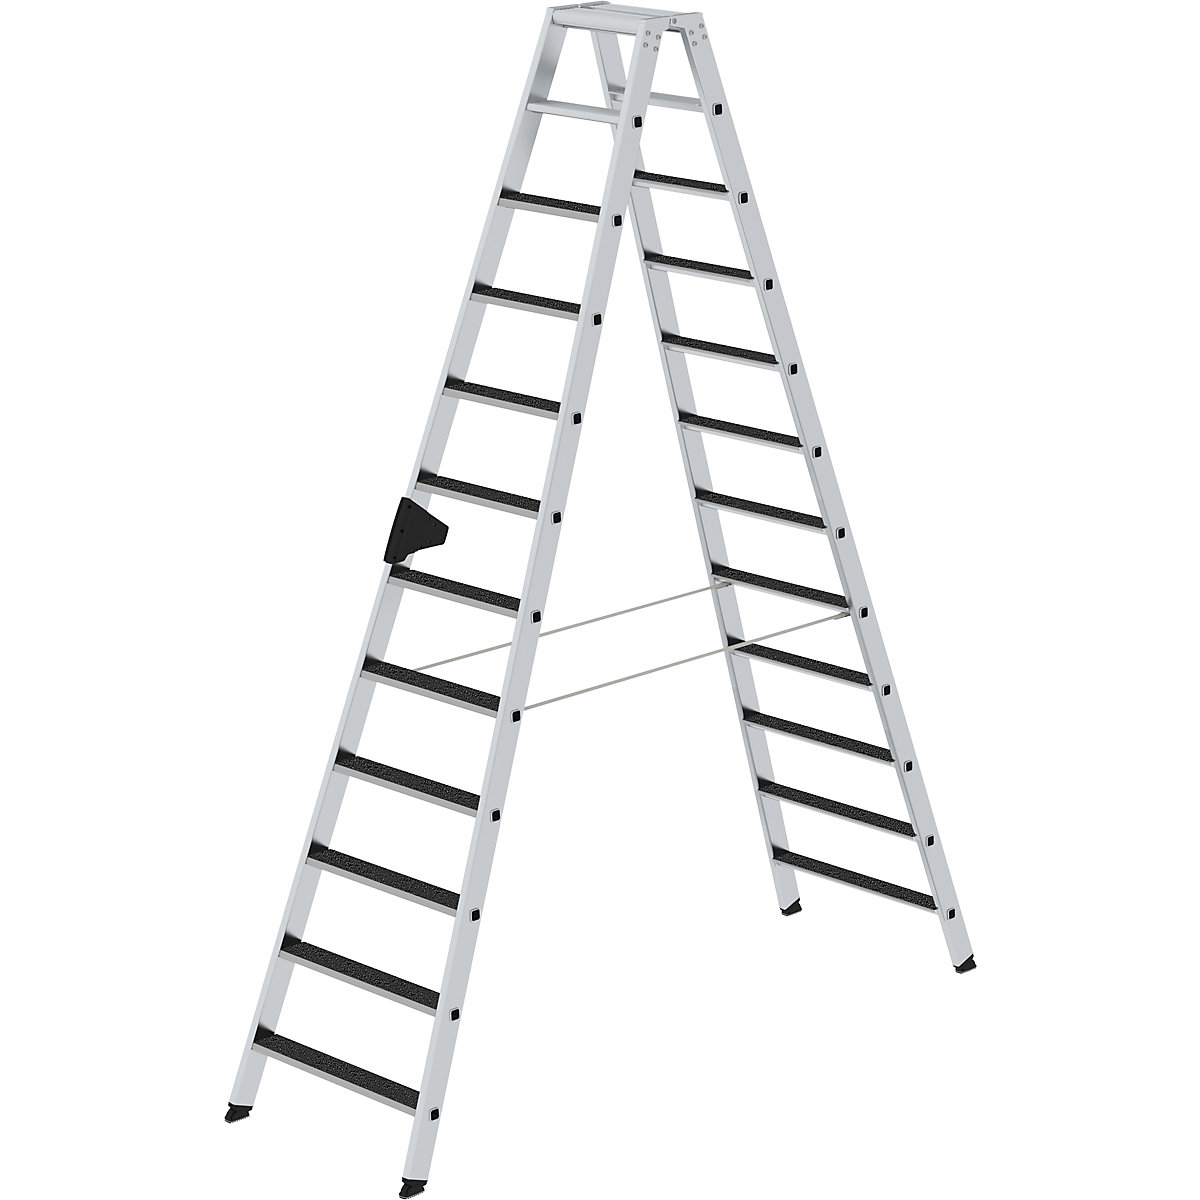 CLIP-STEP step ladder – MUNK, double sided access, slip resistant R13, 2 x 12 steps-11